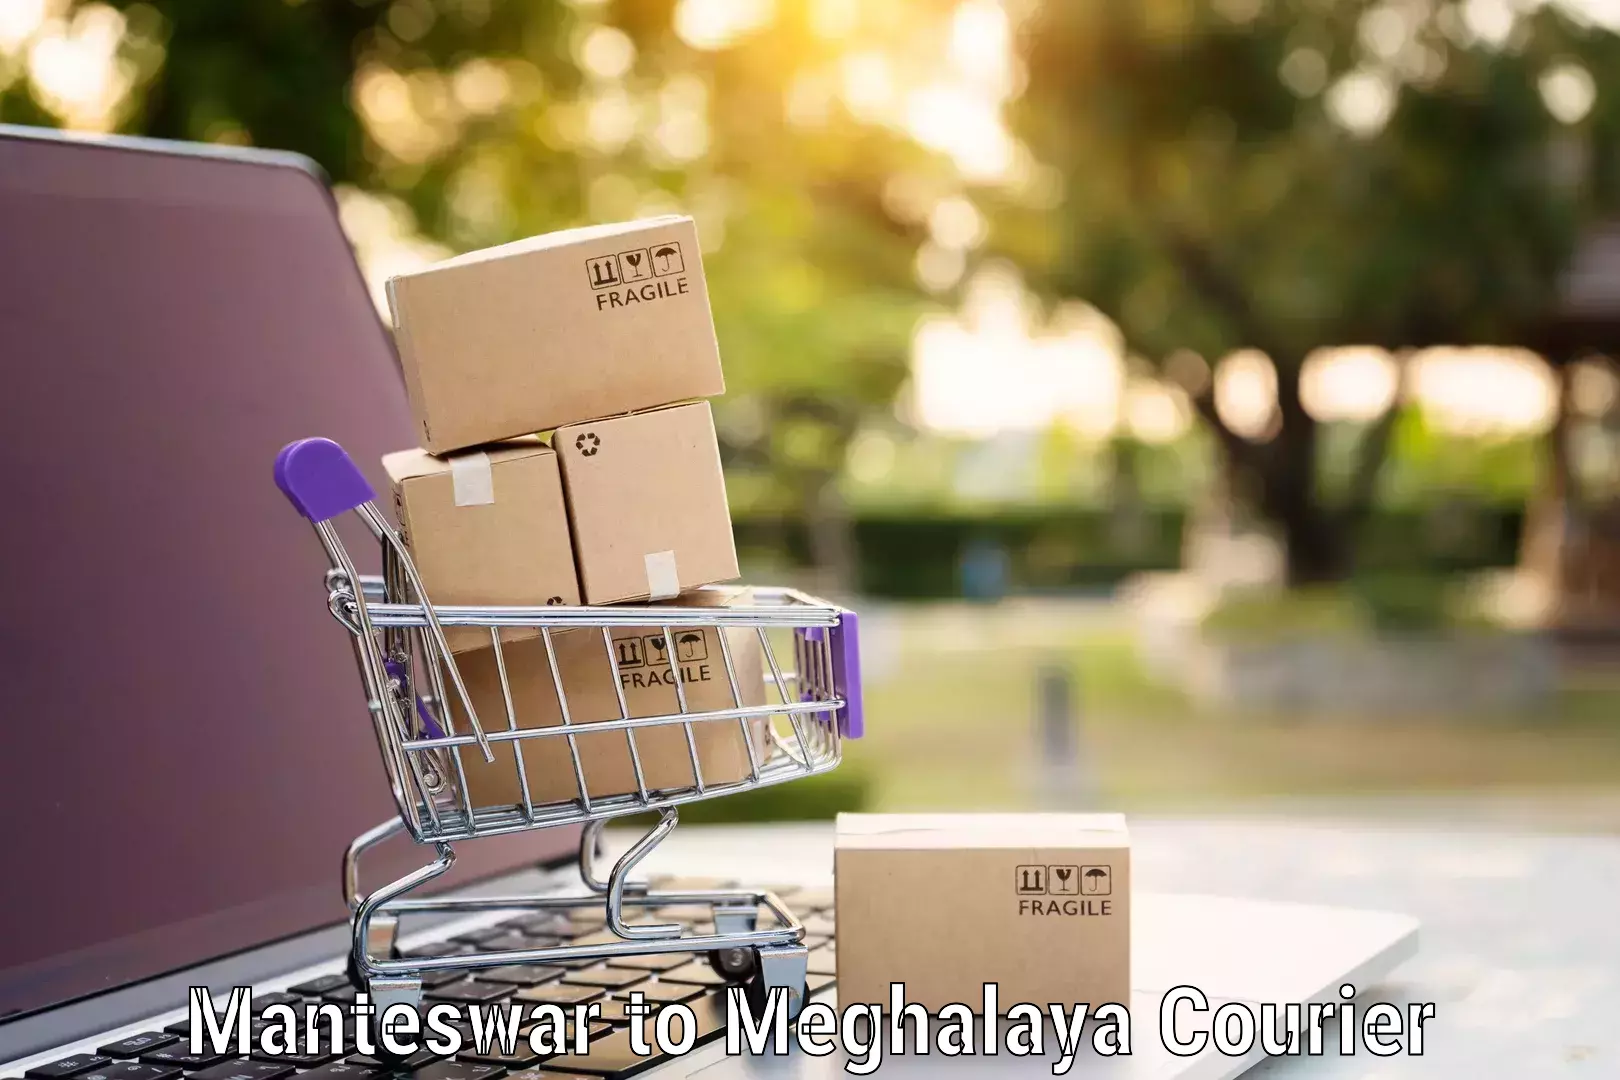 Long-distance moving services in Manteswar to Meghalaya